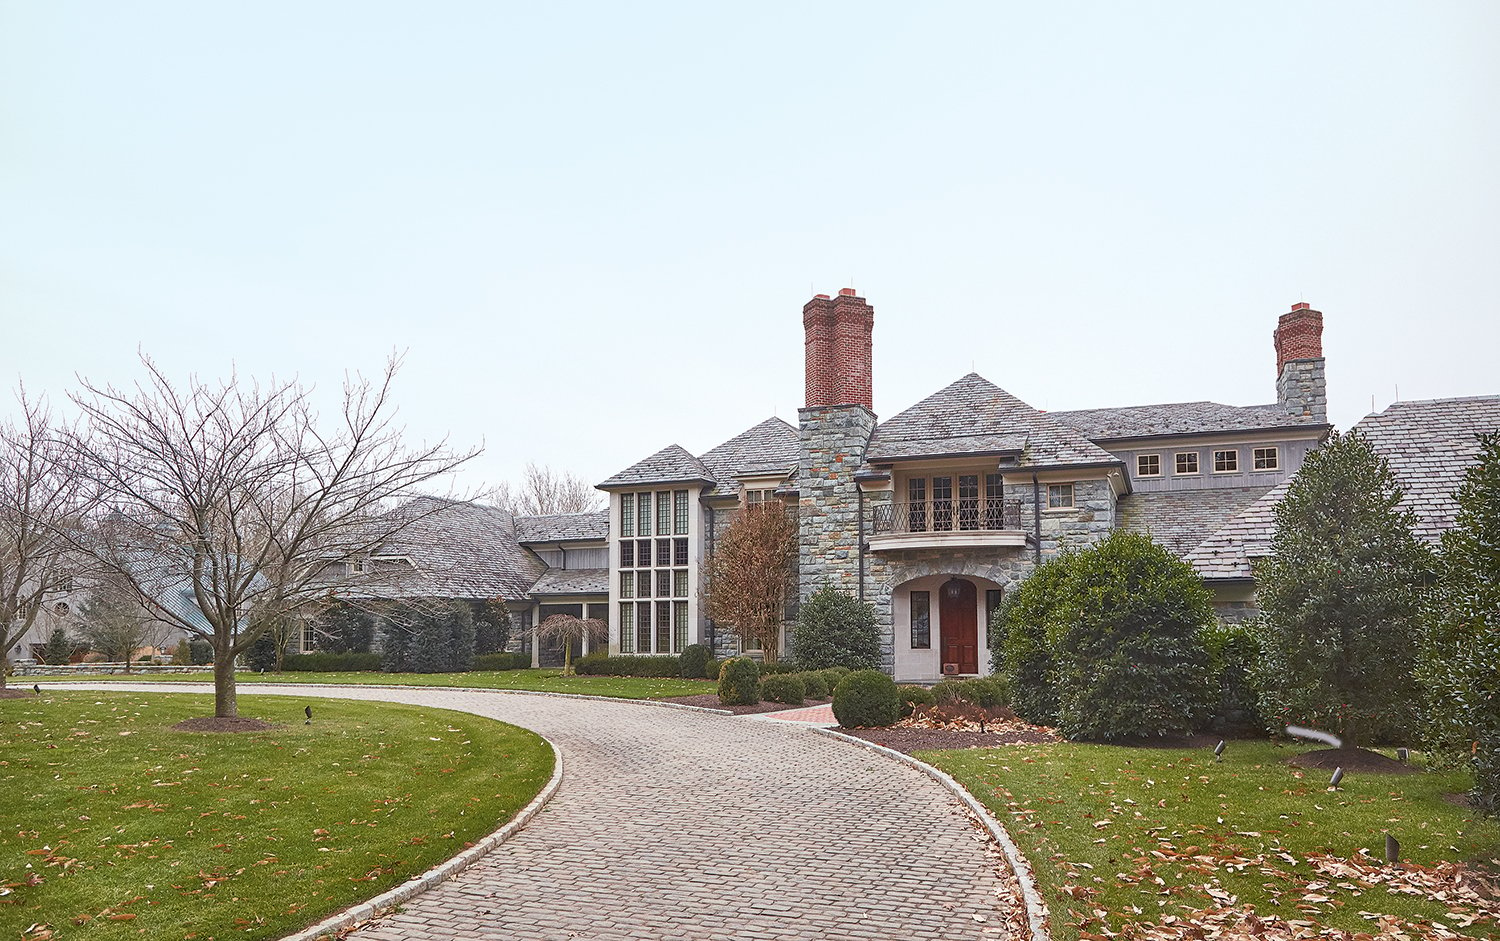 The family's Potomac mansion. Photograph by Jeff Elkins.